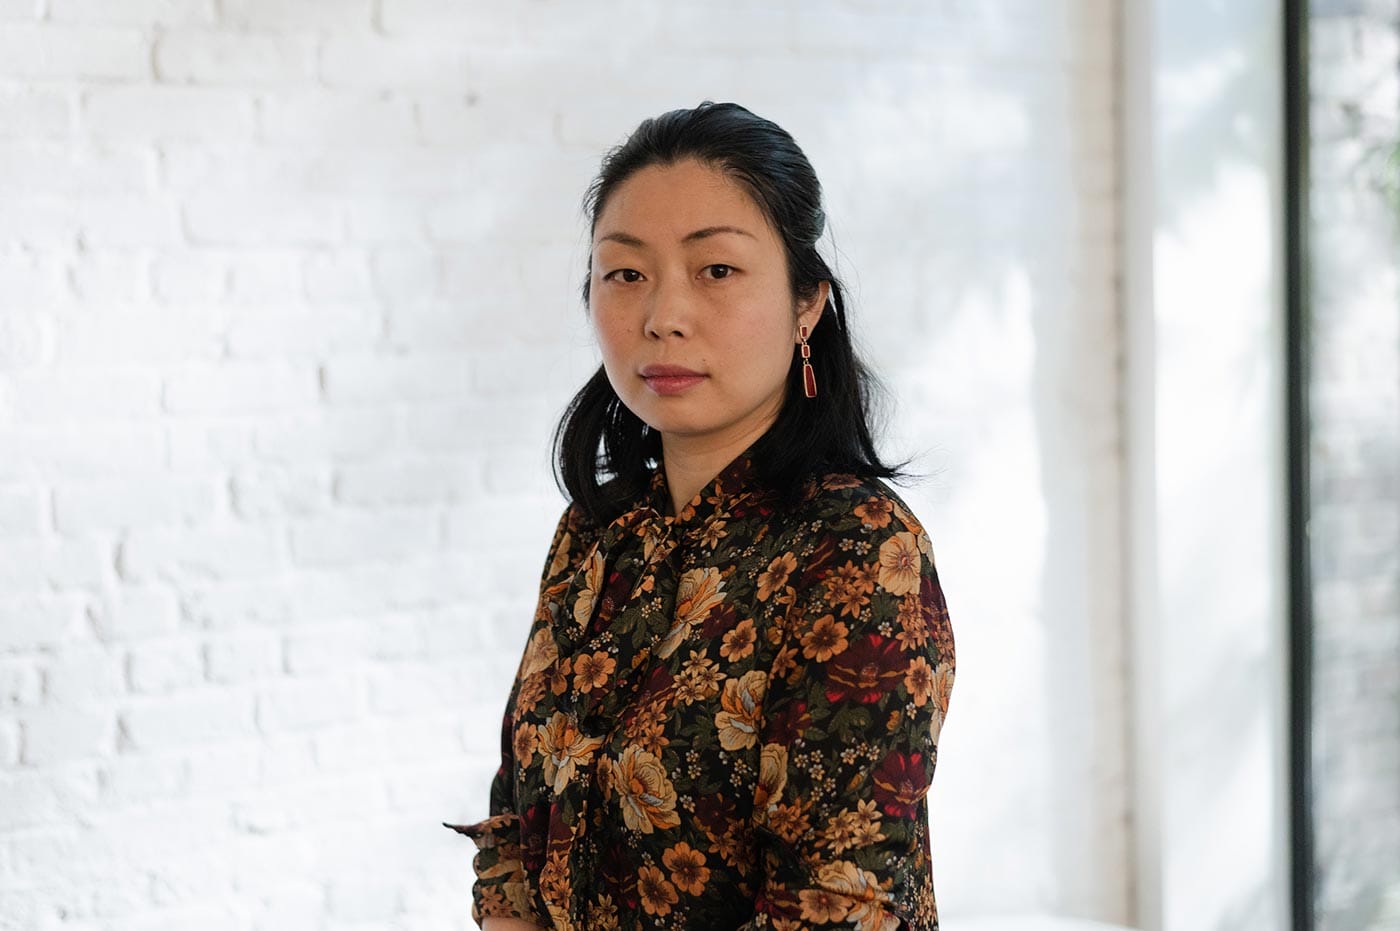 Nanfu Wang, in a floral shirt, standing in front of a white brick wall.